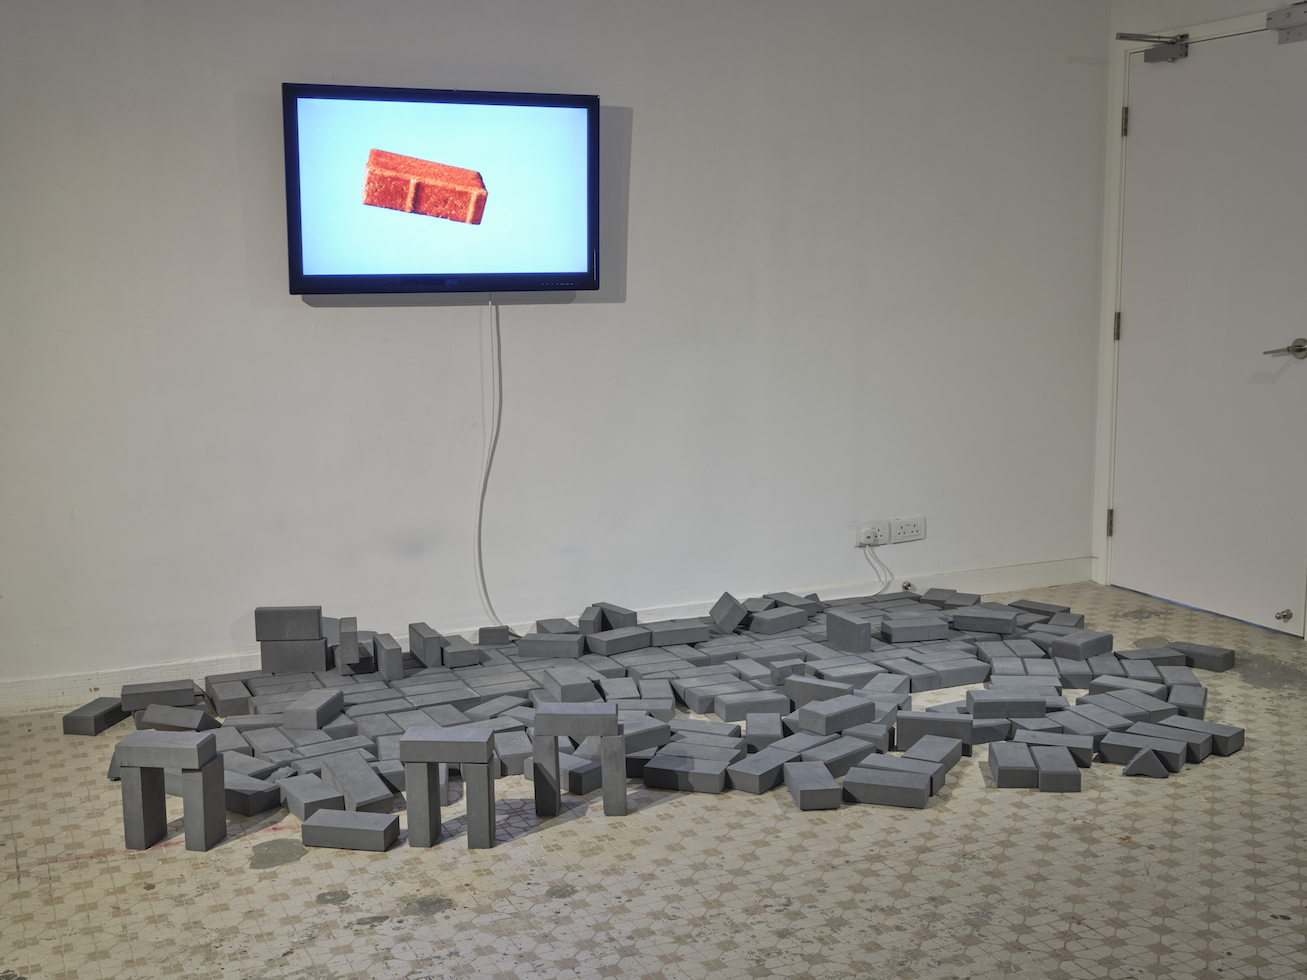 South Ho Siu Nam participates in group exhibition “Fault Lines” at Present Projects